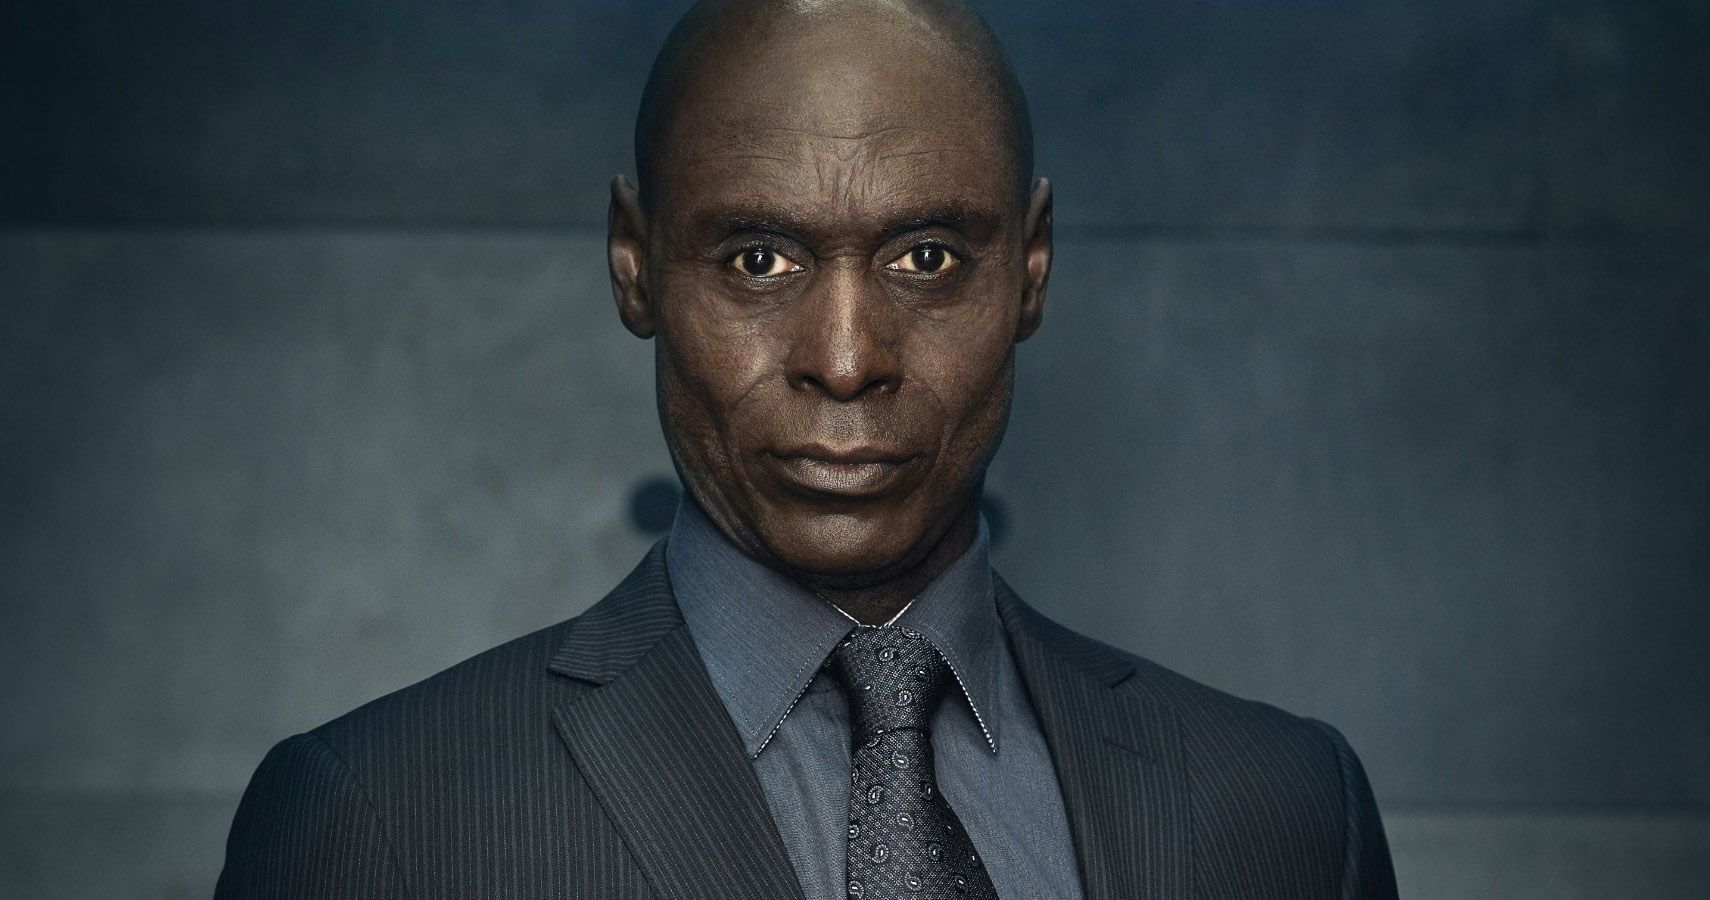 No One Plays A Disgruntled Authority Figure Better Than Lance Reddick